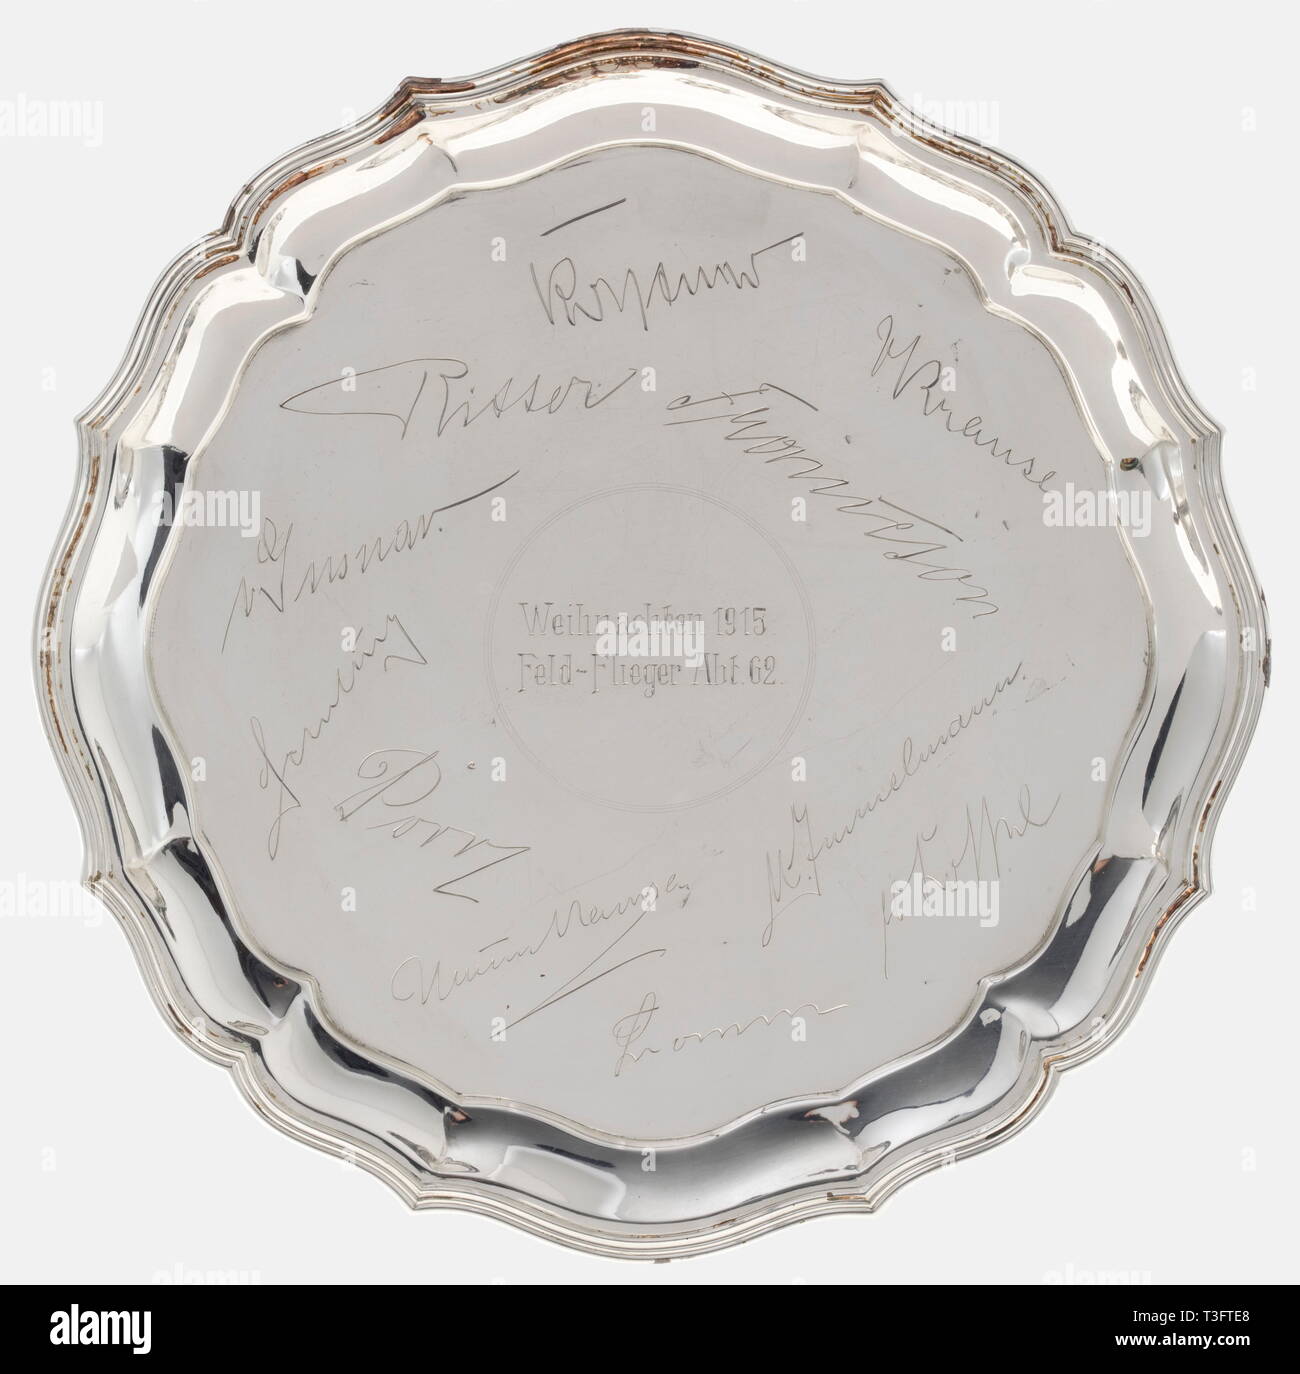 Captain Oswald Boelcke (1891 - 1916), a silver plate, a Christmas present, from his comrades of the FFA 62 in 1915 Silver with a scalloped rim bearing the dedication inscription on the bottom, 'Weihnachten 1915. Feld-Flieger Abt. 62' (Christmas 1915 Field Aviation Unit 62) with eleven signatures, including the flight commander, Captain Kastner, Max Immelmann, von Krause, von Gürner, Ritter, Frome, Schilling, Monnington(?), and Dörr. By the time of his death on 28 October 1916, Oswald Boelcke was the highest scoring ace in the world with 40 confir, Additional-Rights-Clearance-Info-Not-Available Stock Photo